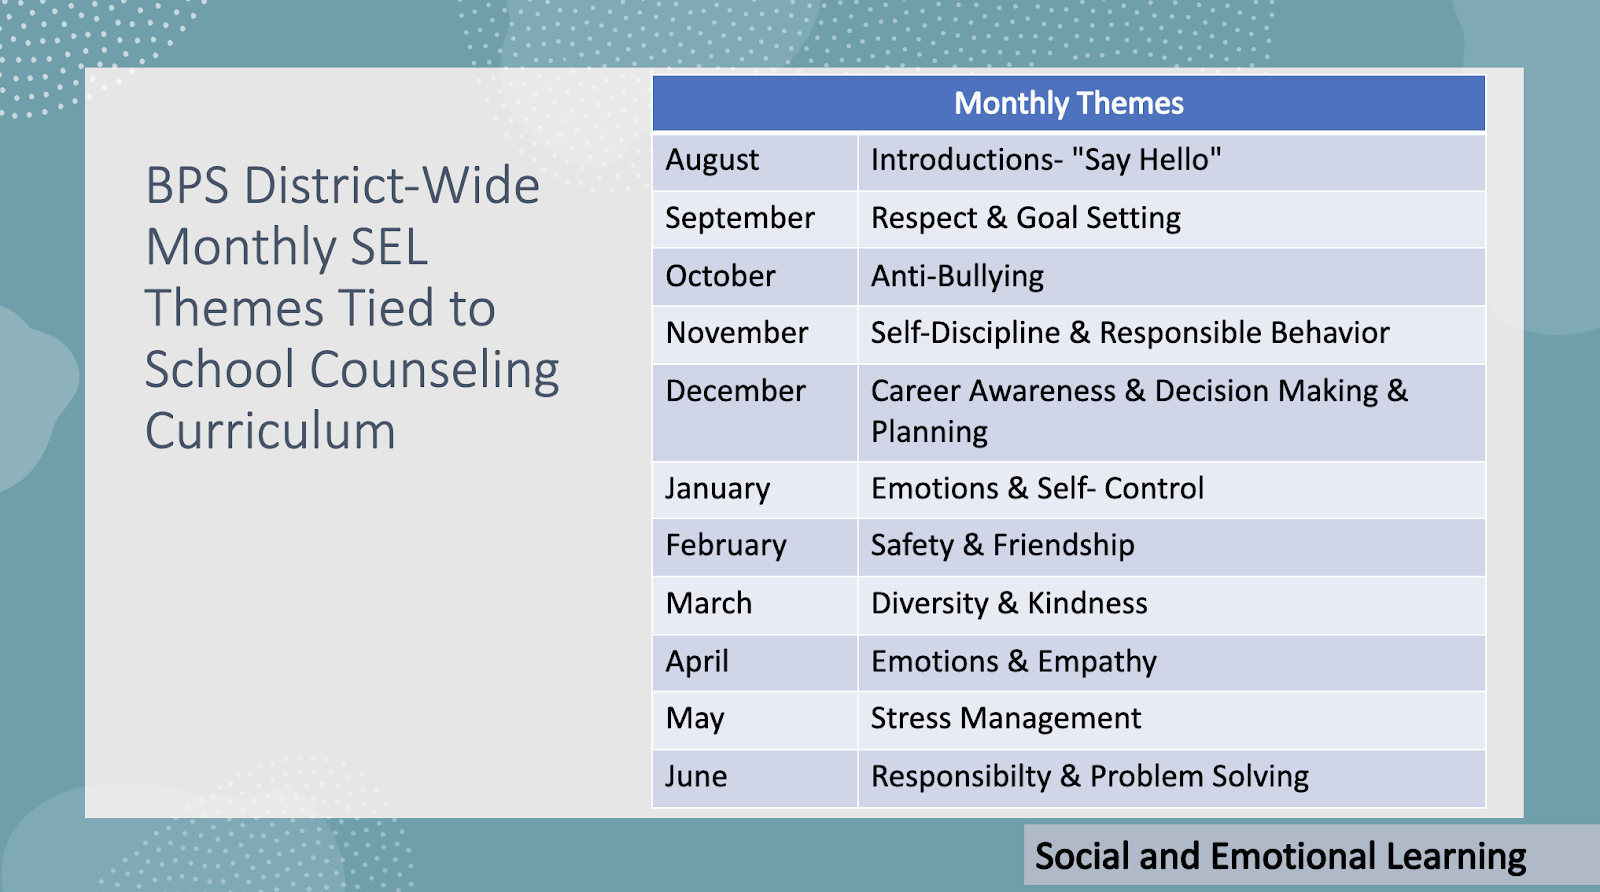 BPS District-wide Monthly SEL Themes